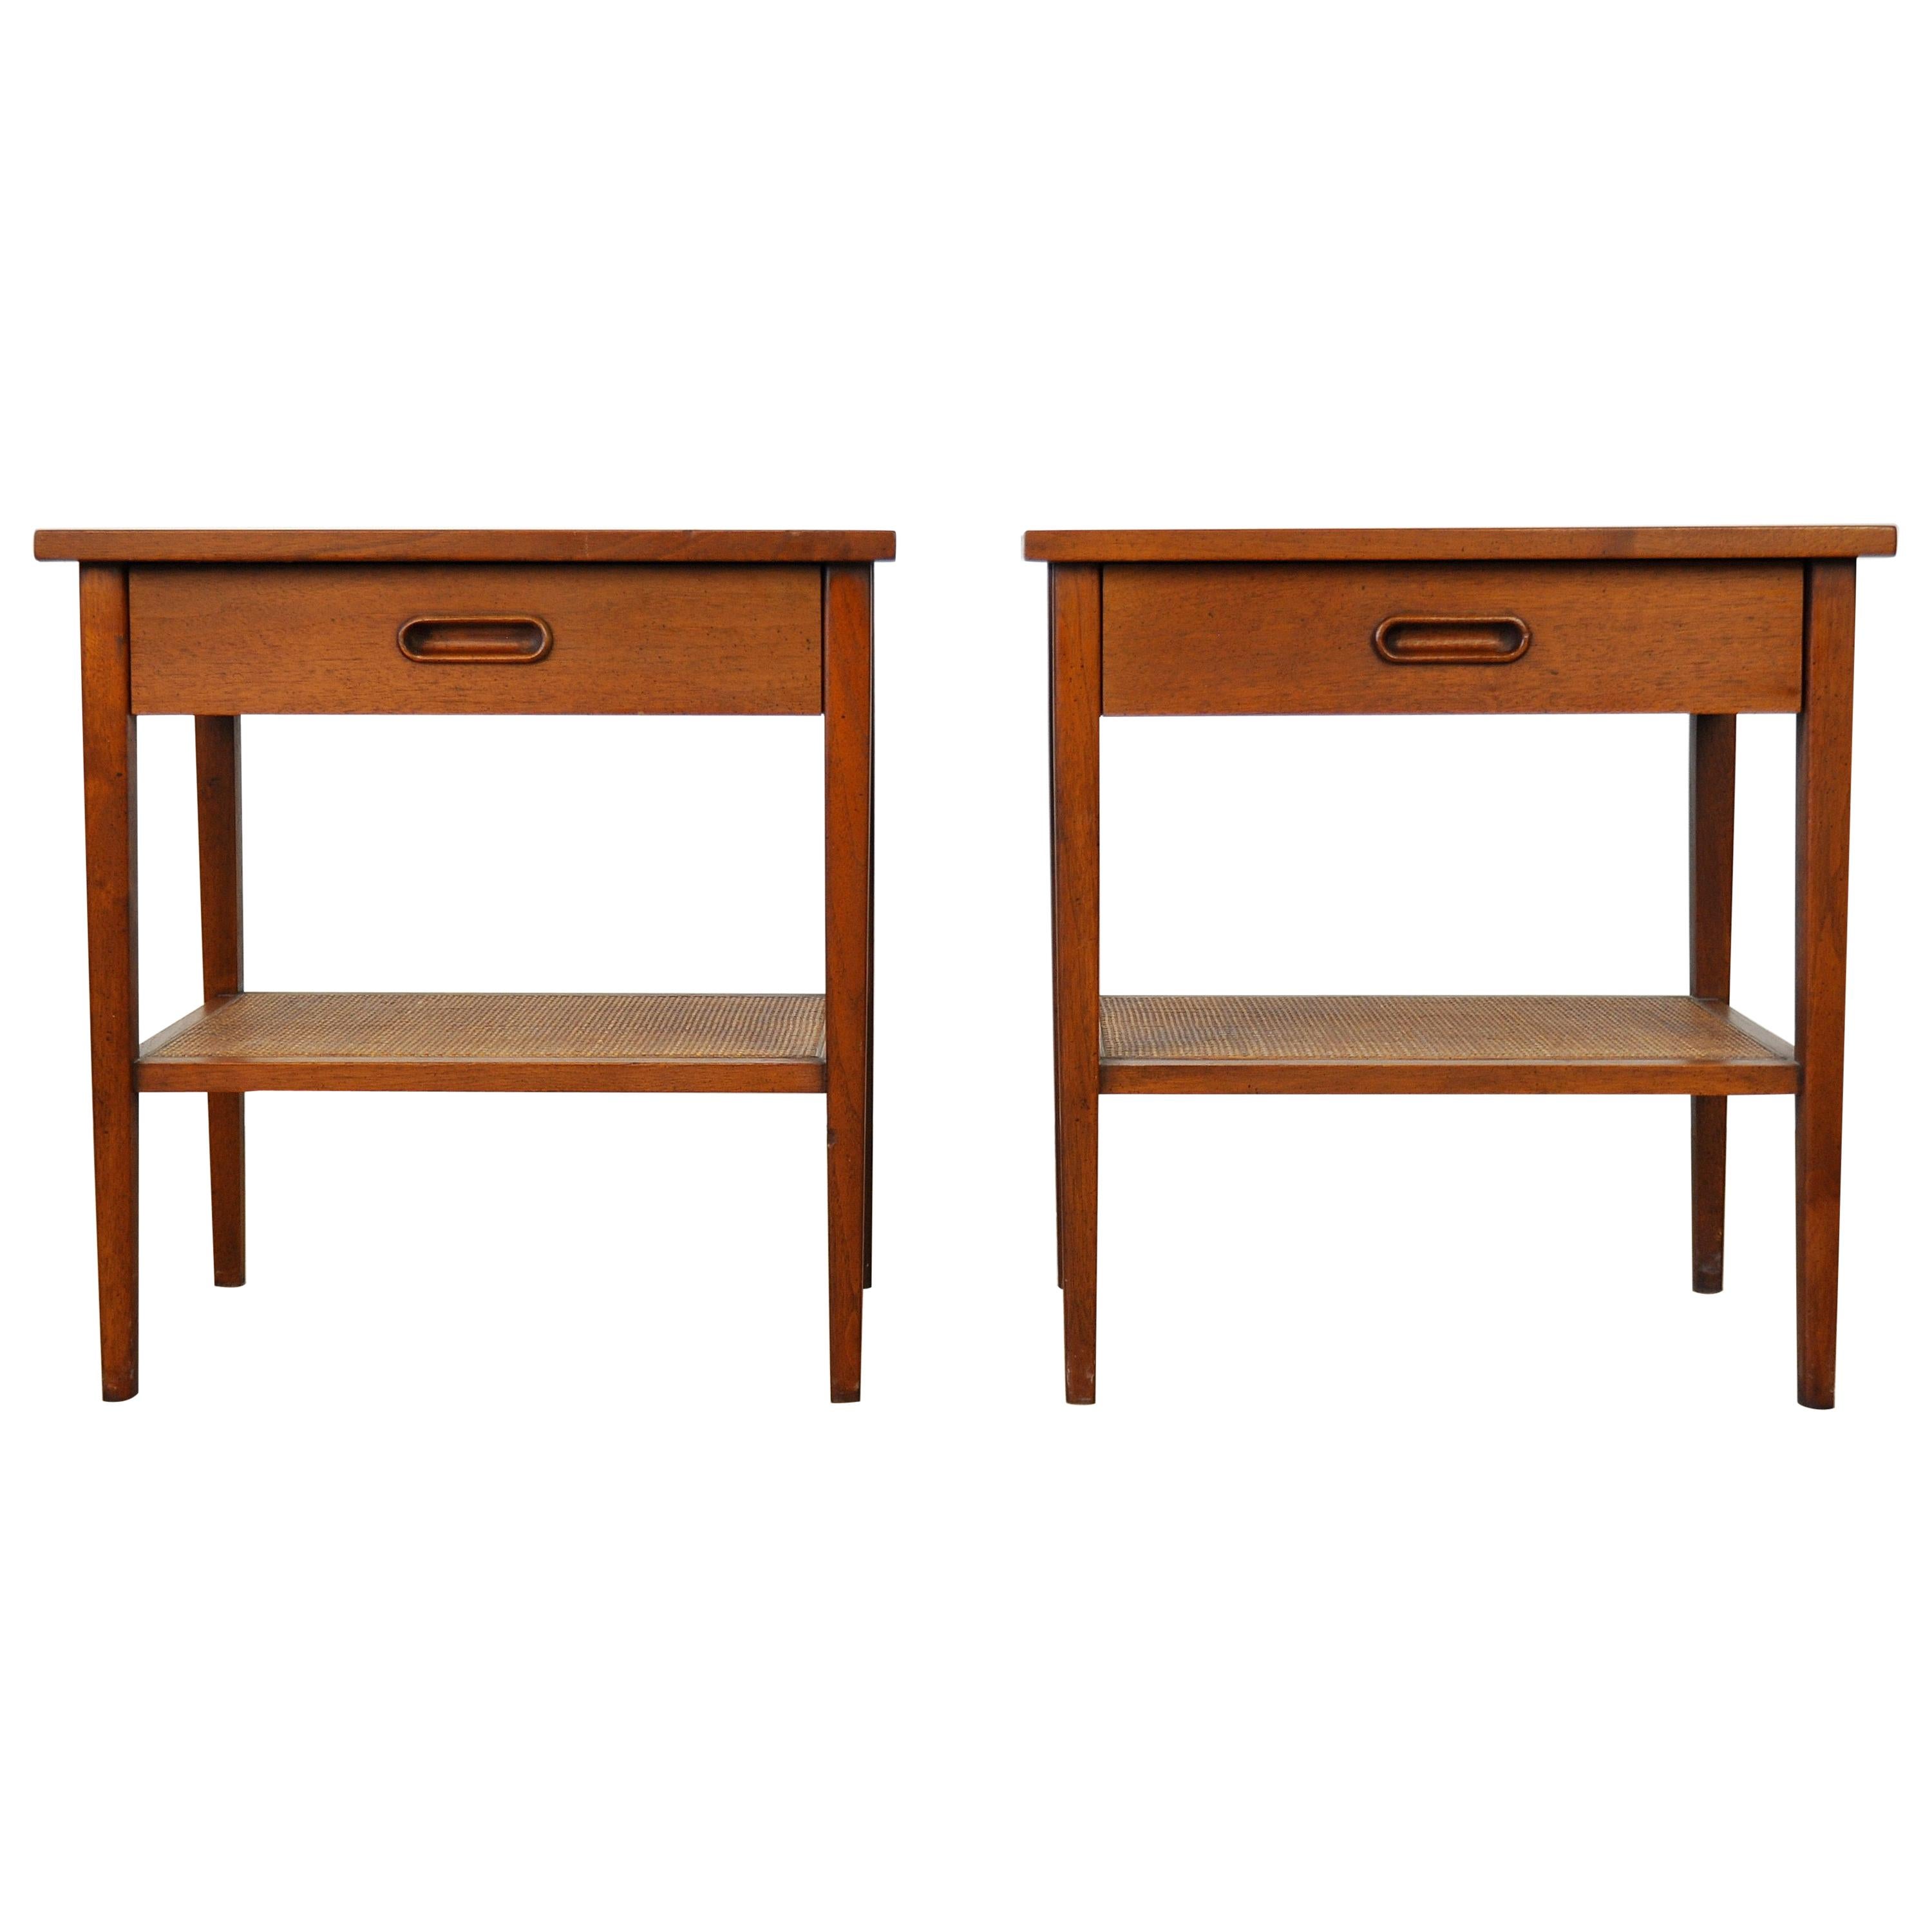 Pair of Jack Cartwright for Founders Walnut and Cane Nightstands or Side Tables